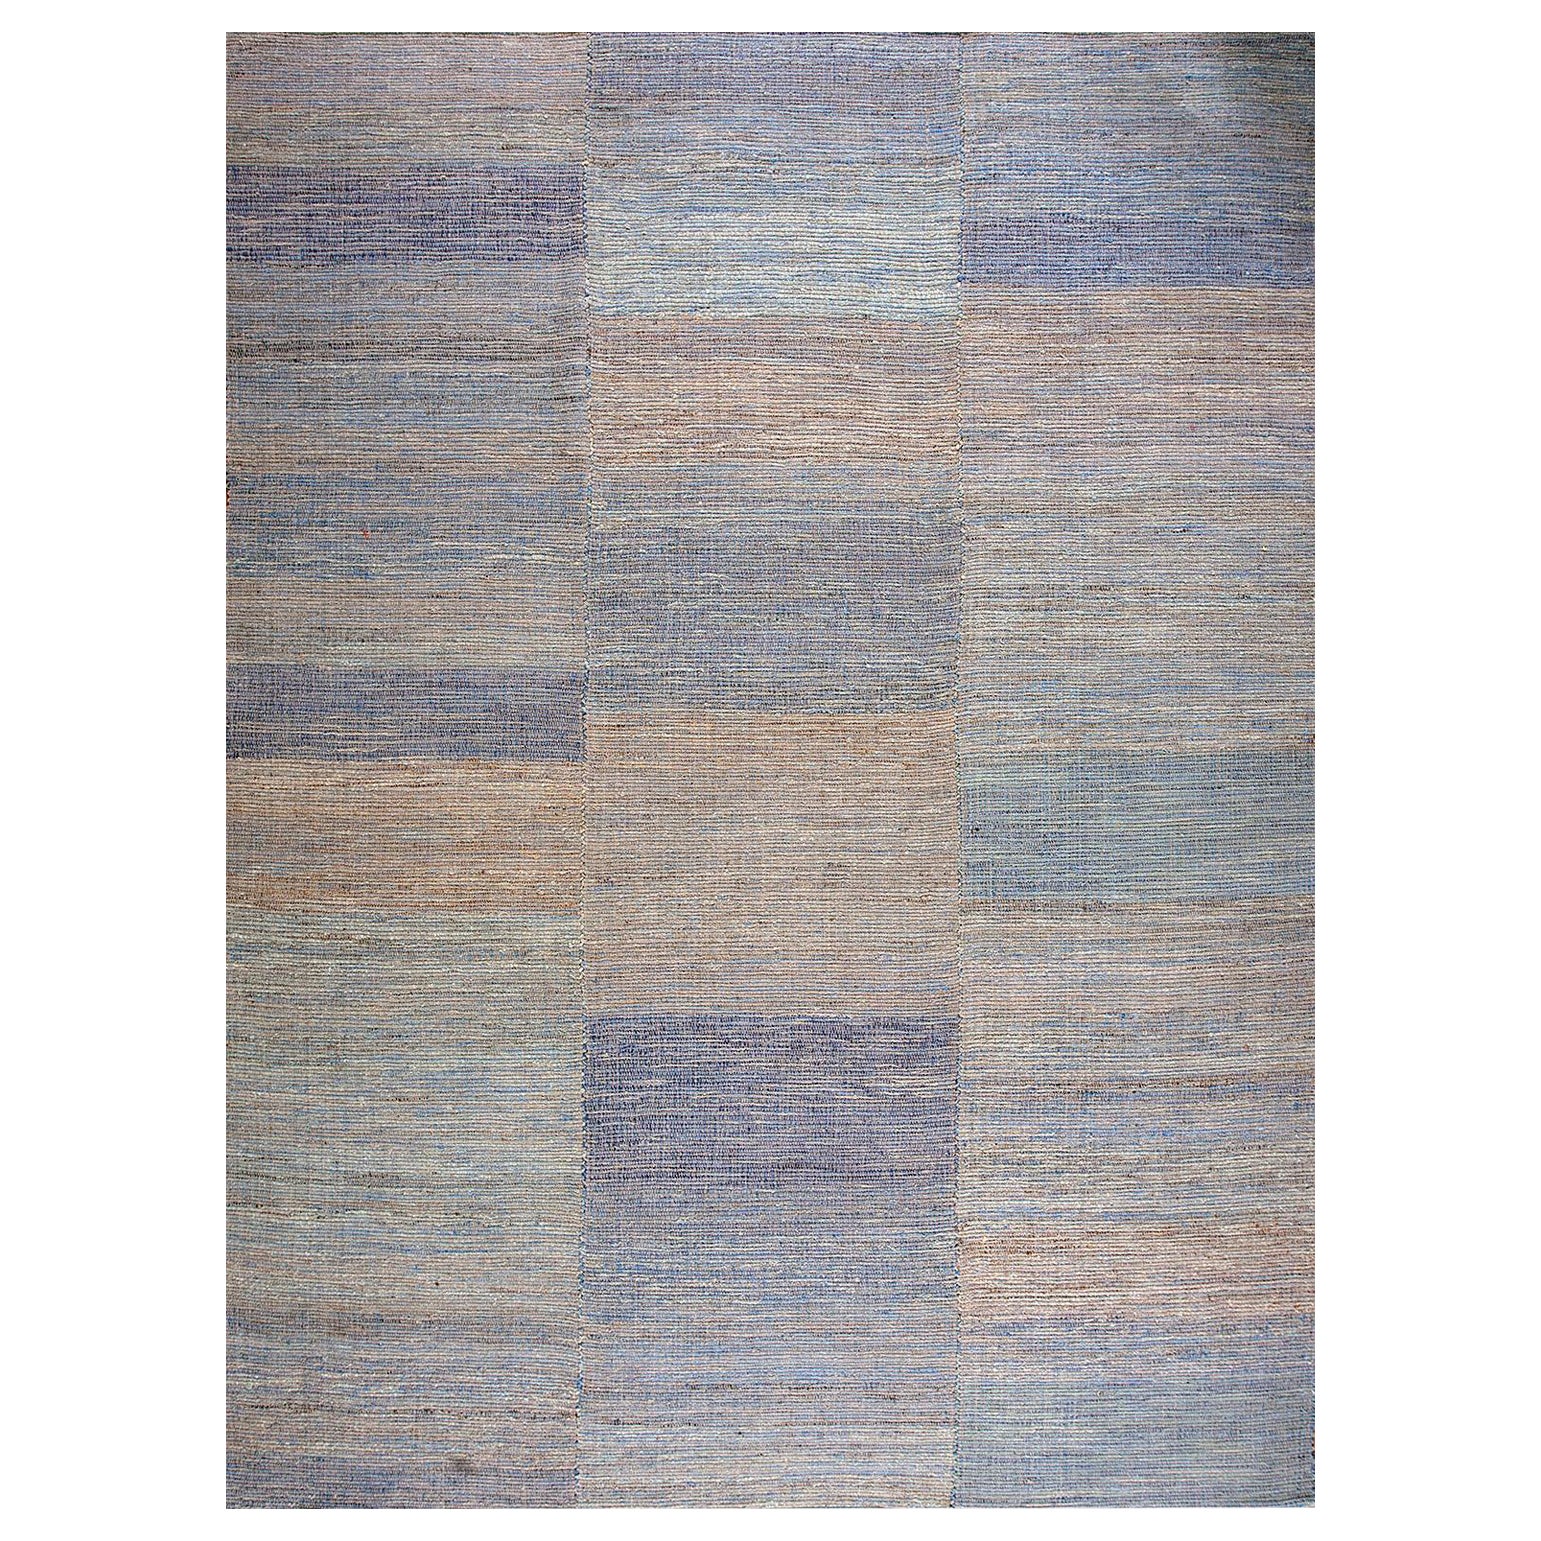 Contemporary Handwoven Wool Shaker Style Flat Weave Carpet 9' 0" X 11' 9"